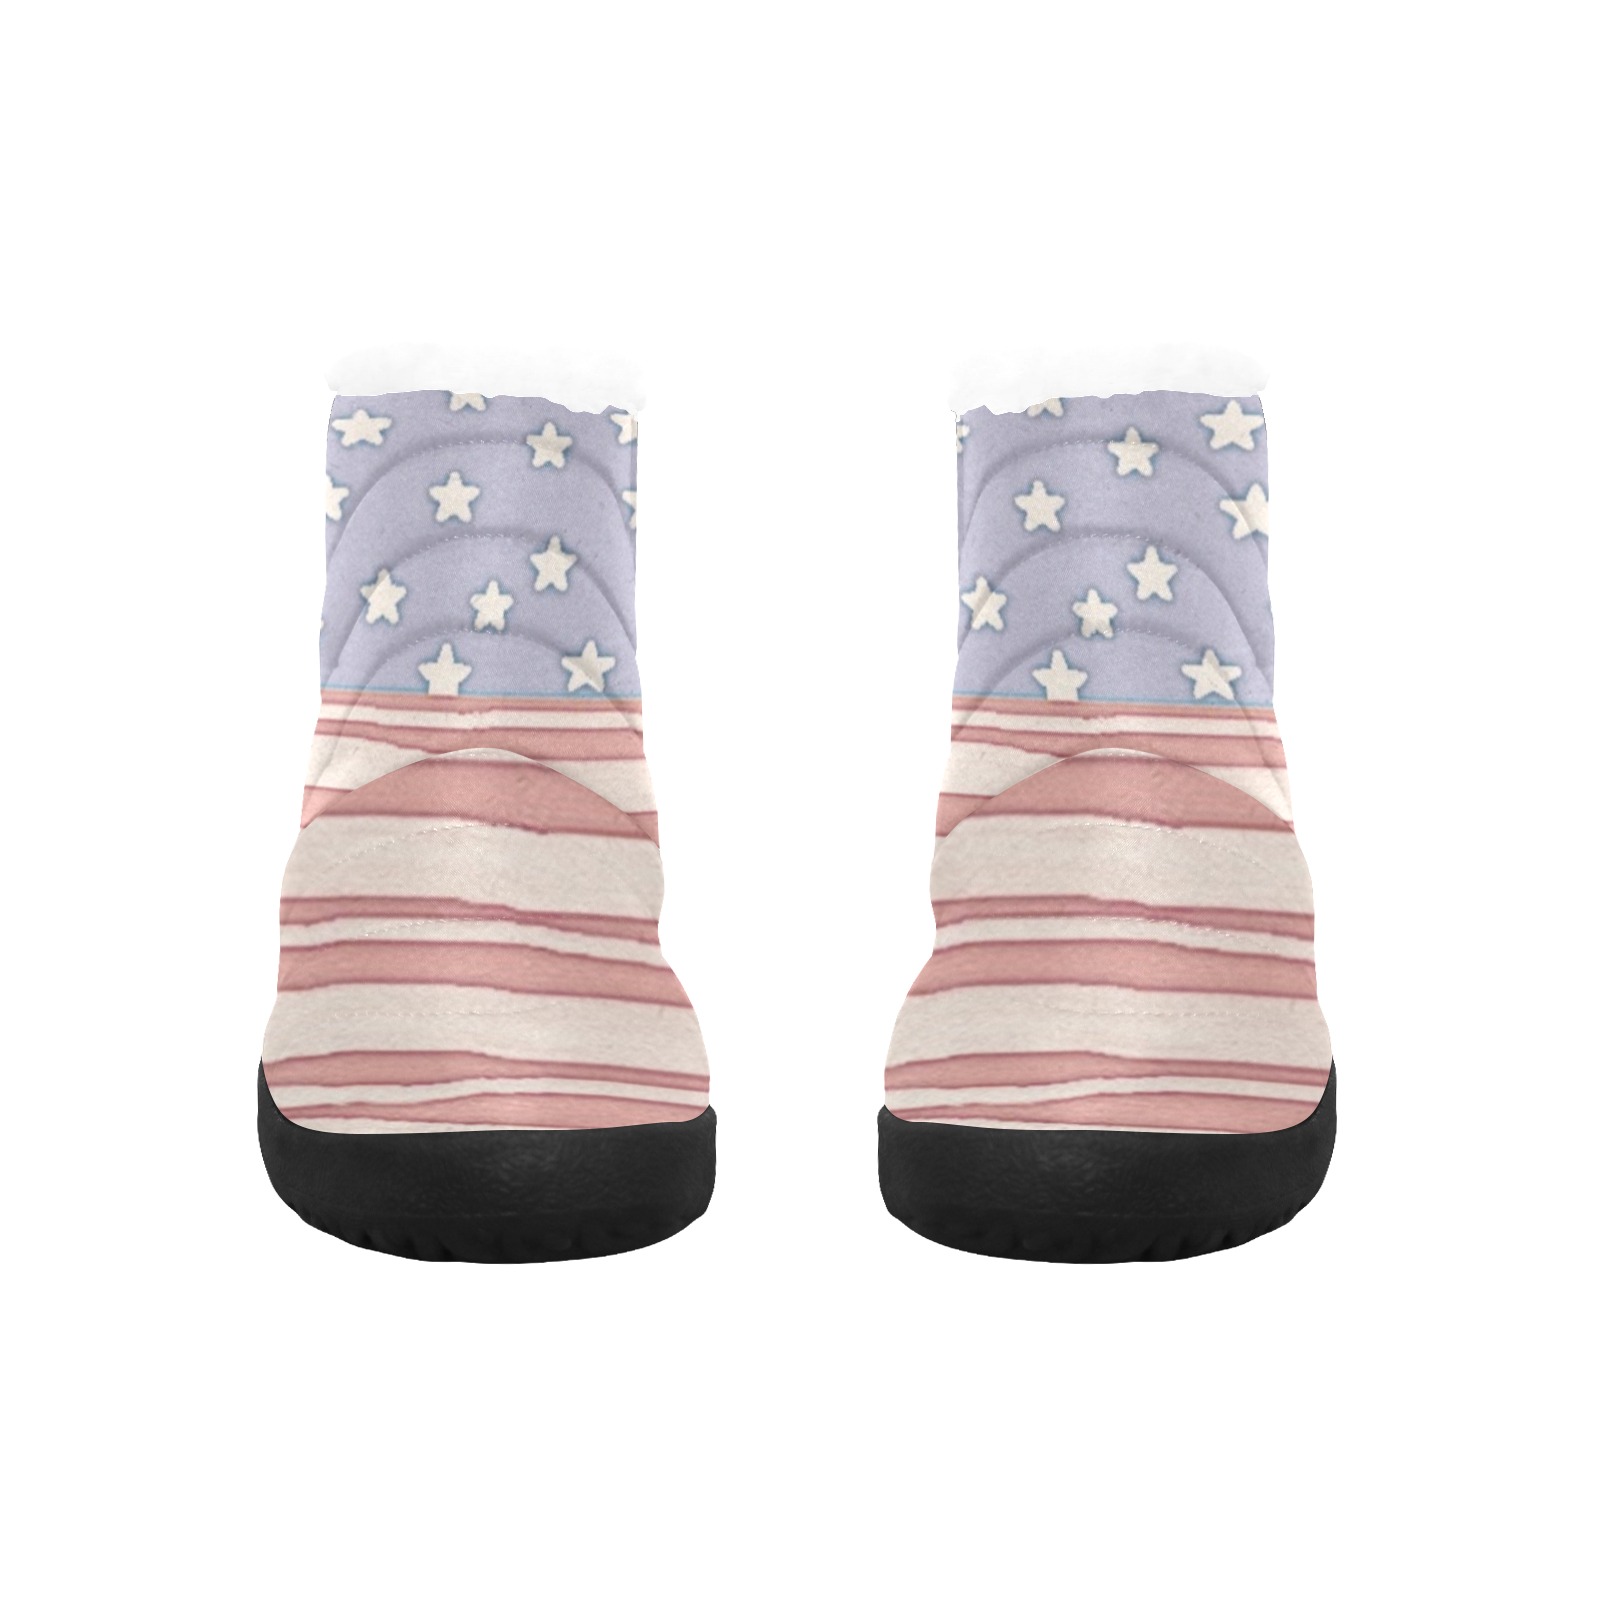 American flag Women's Cotton-Padded Shoes (Model 19291)